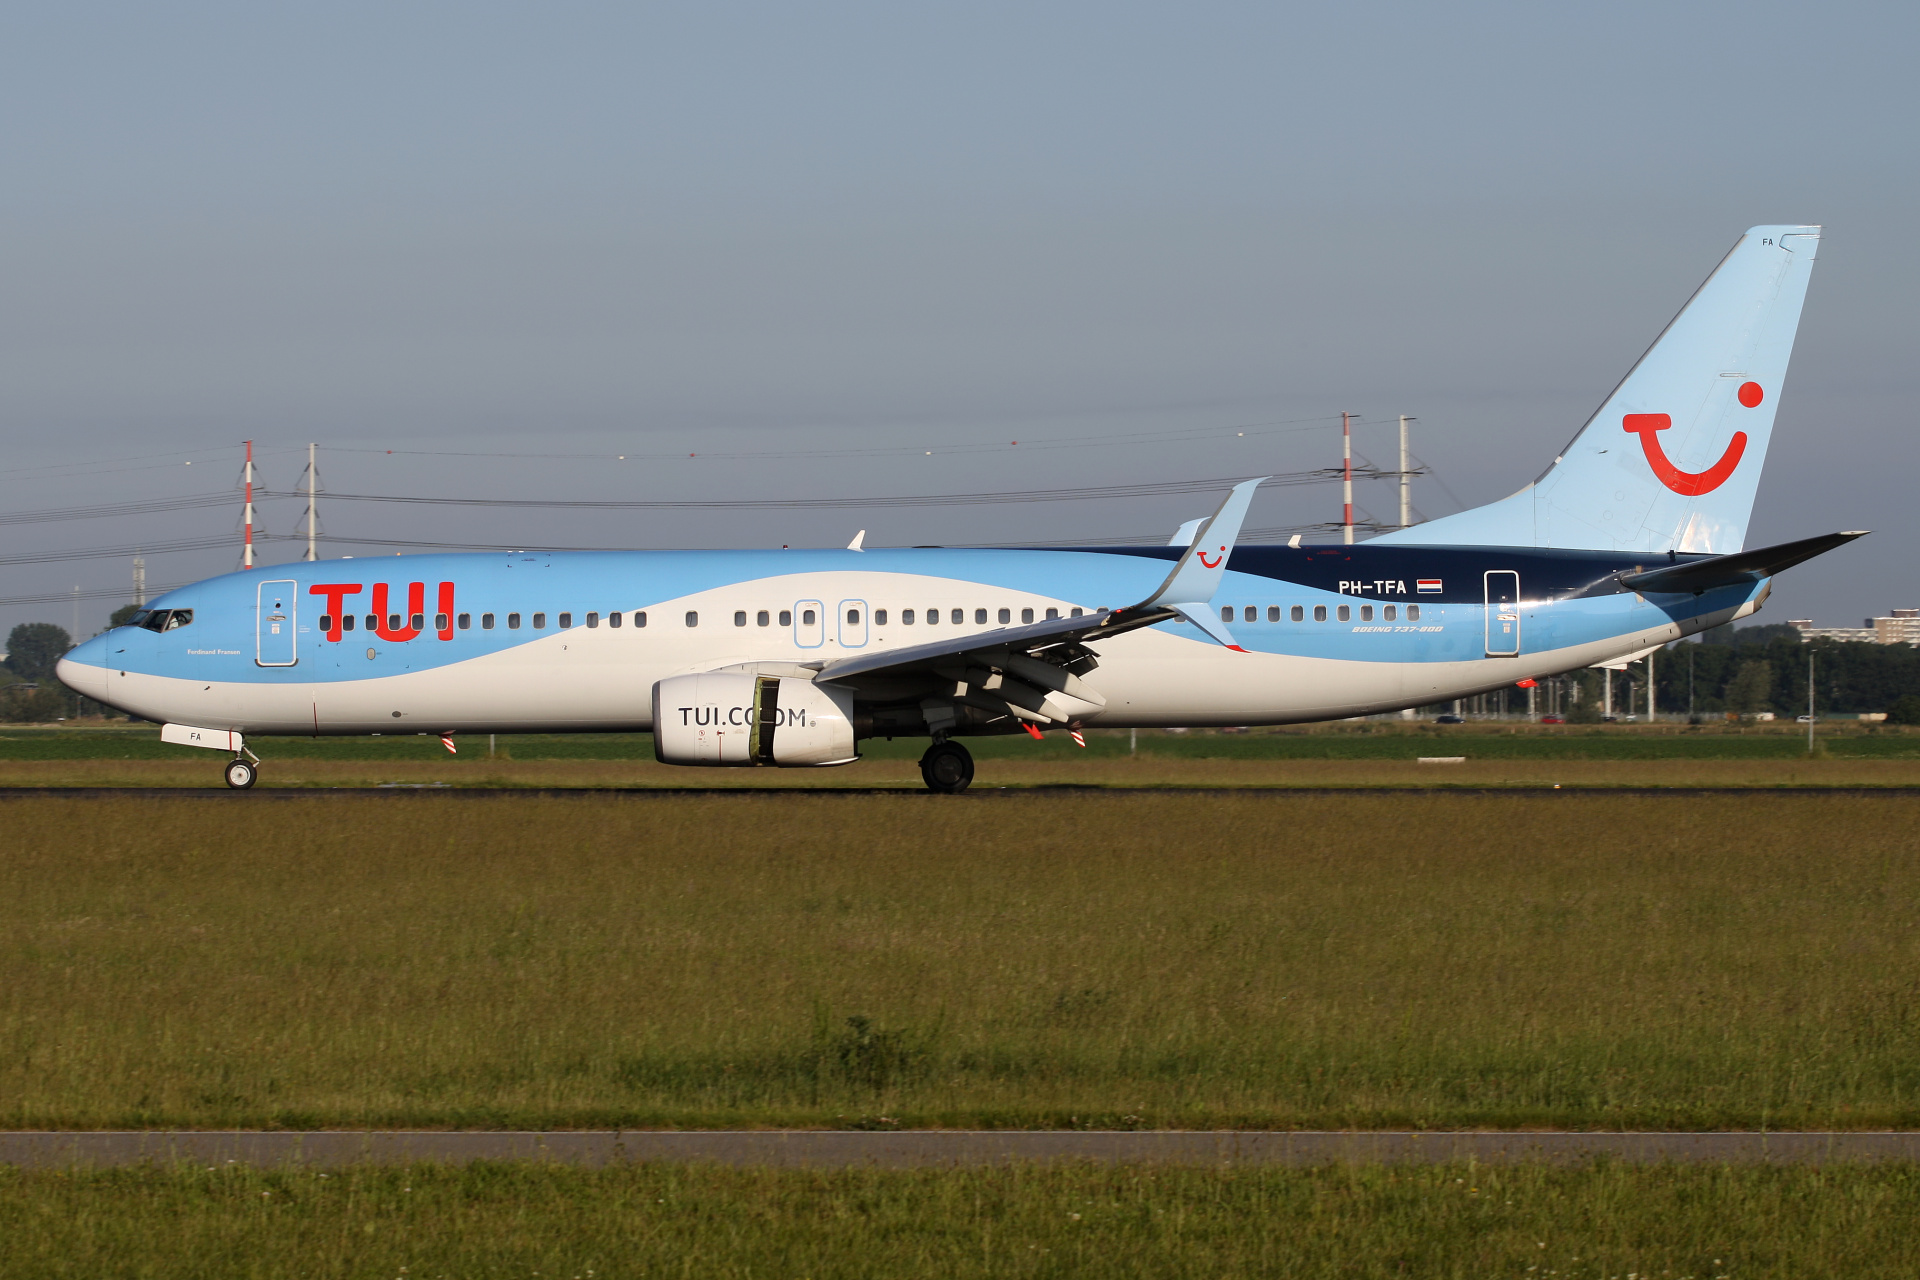 PH-TFA, TUI fly Netherlands (Aircraft » Schiphol Spotting » Boeing 737-800)